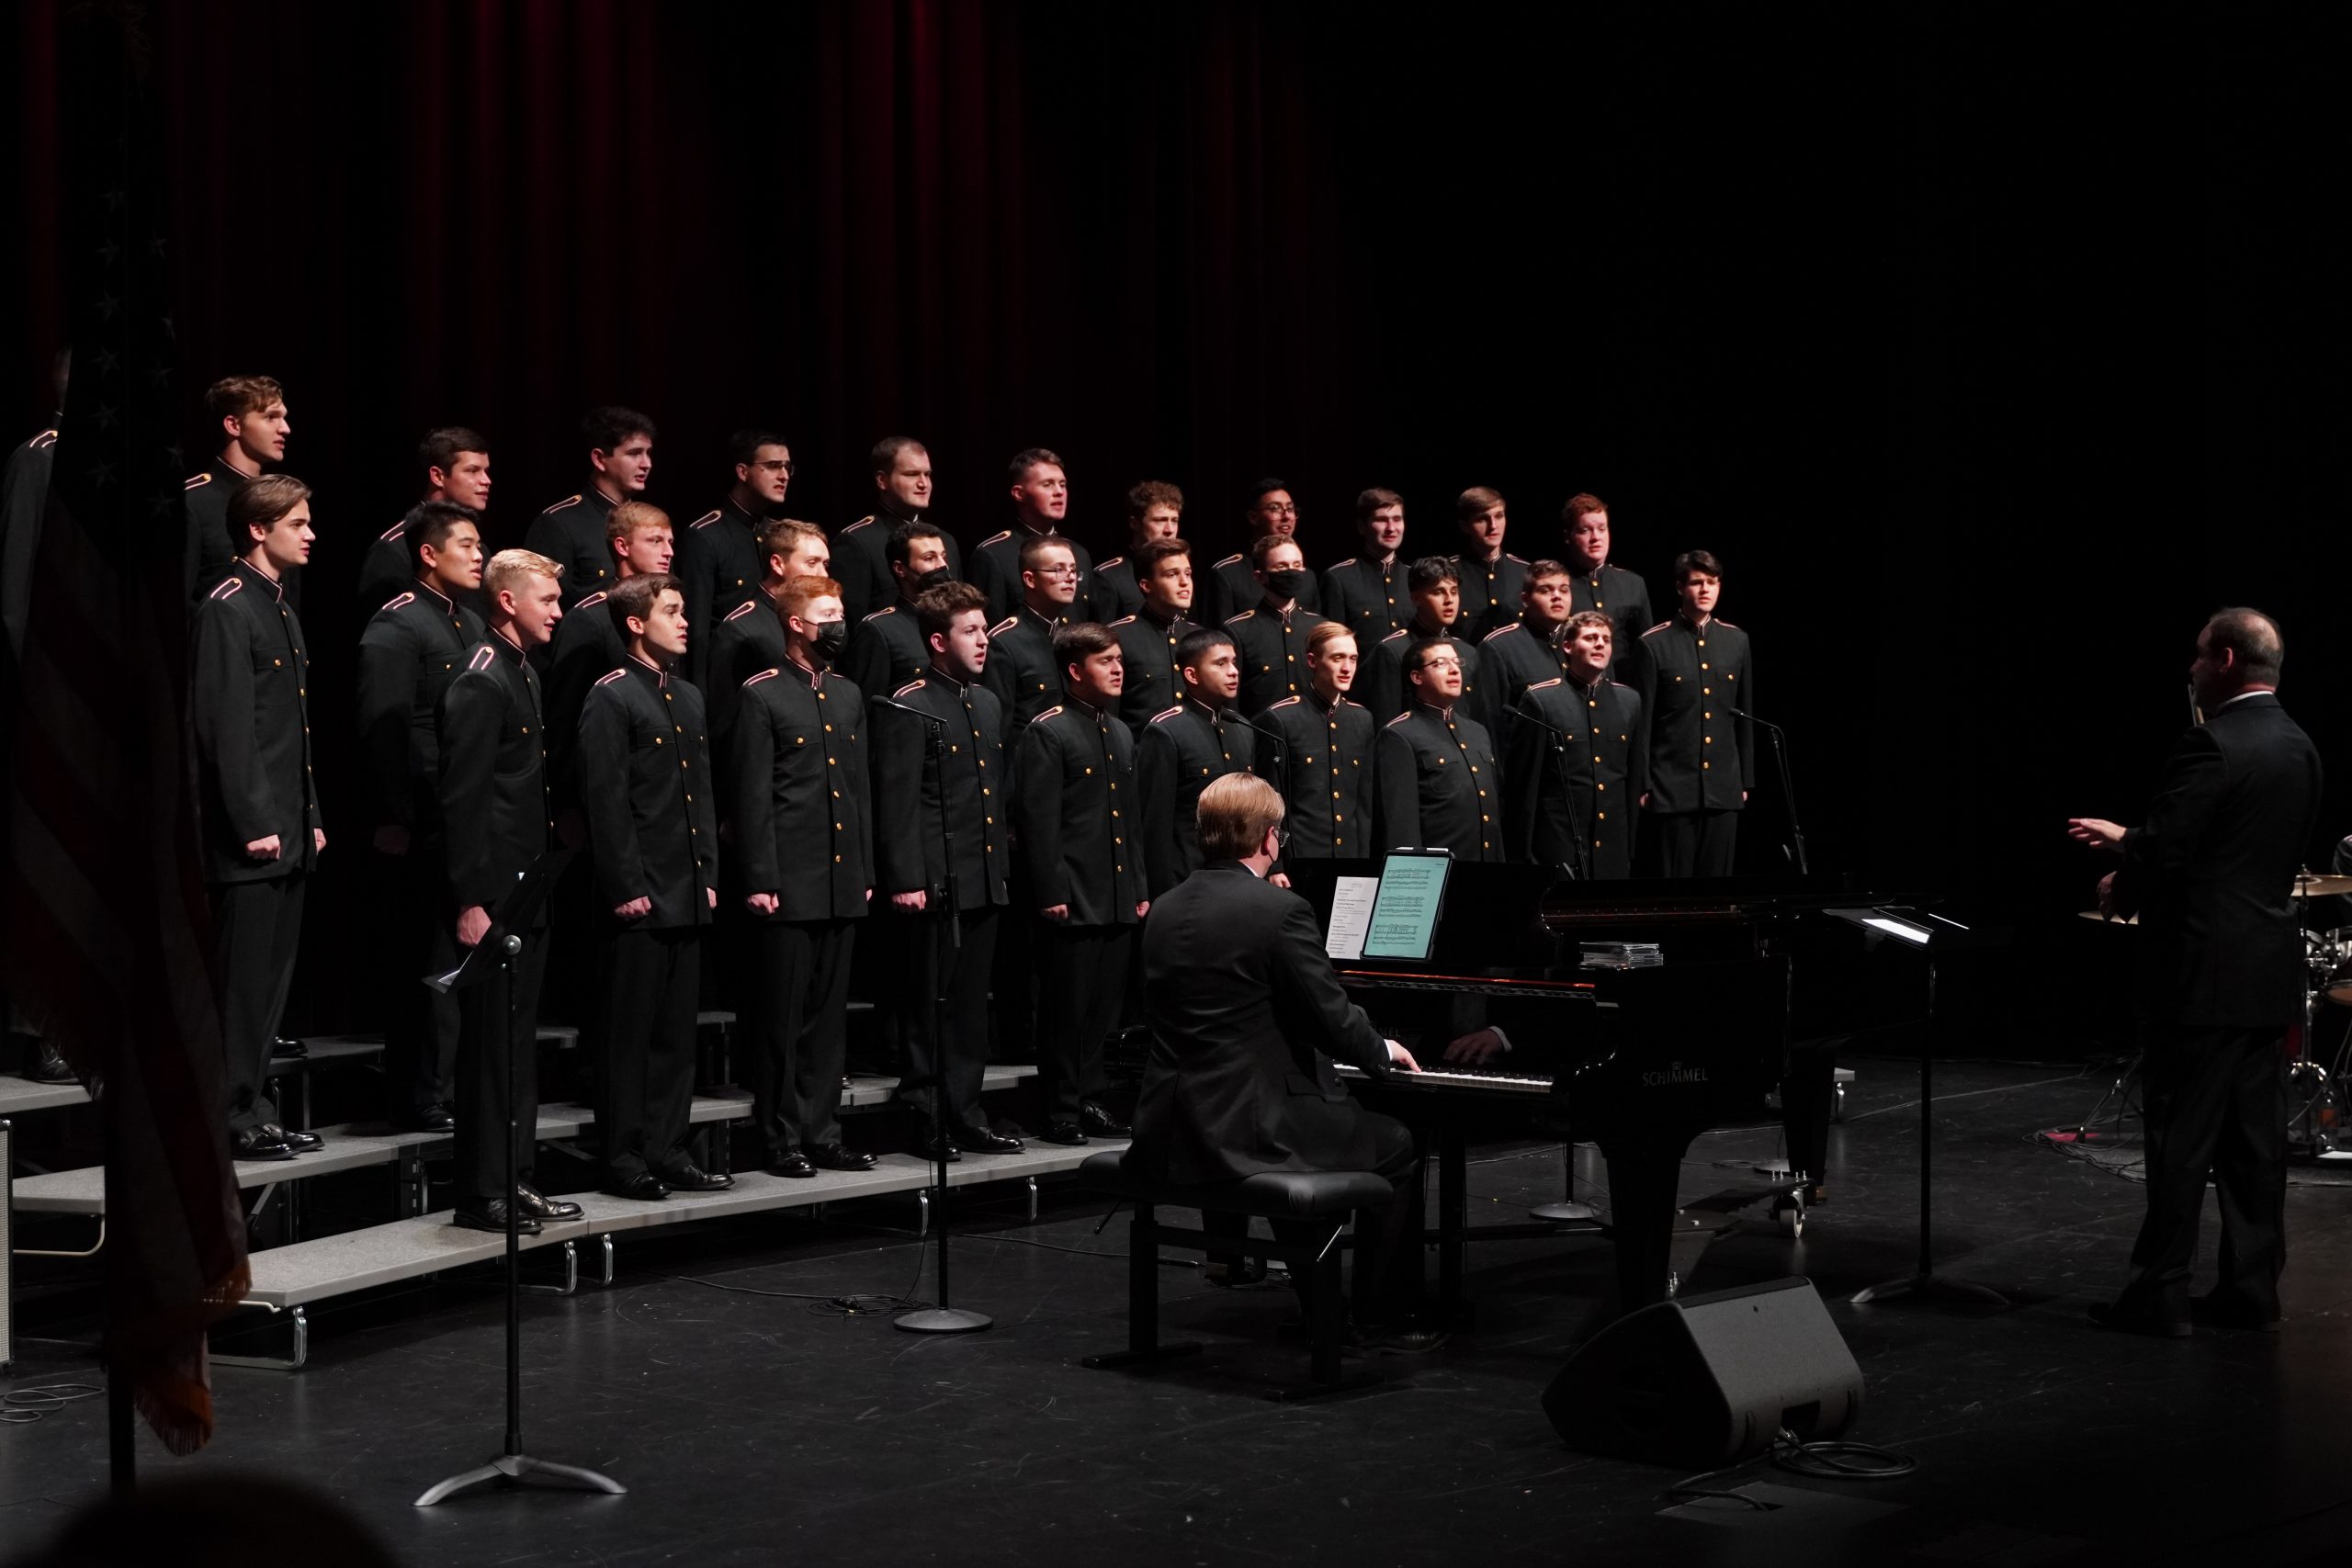 Singing Cadets performing on stage